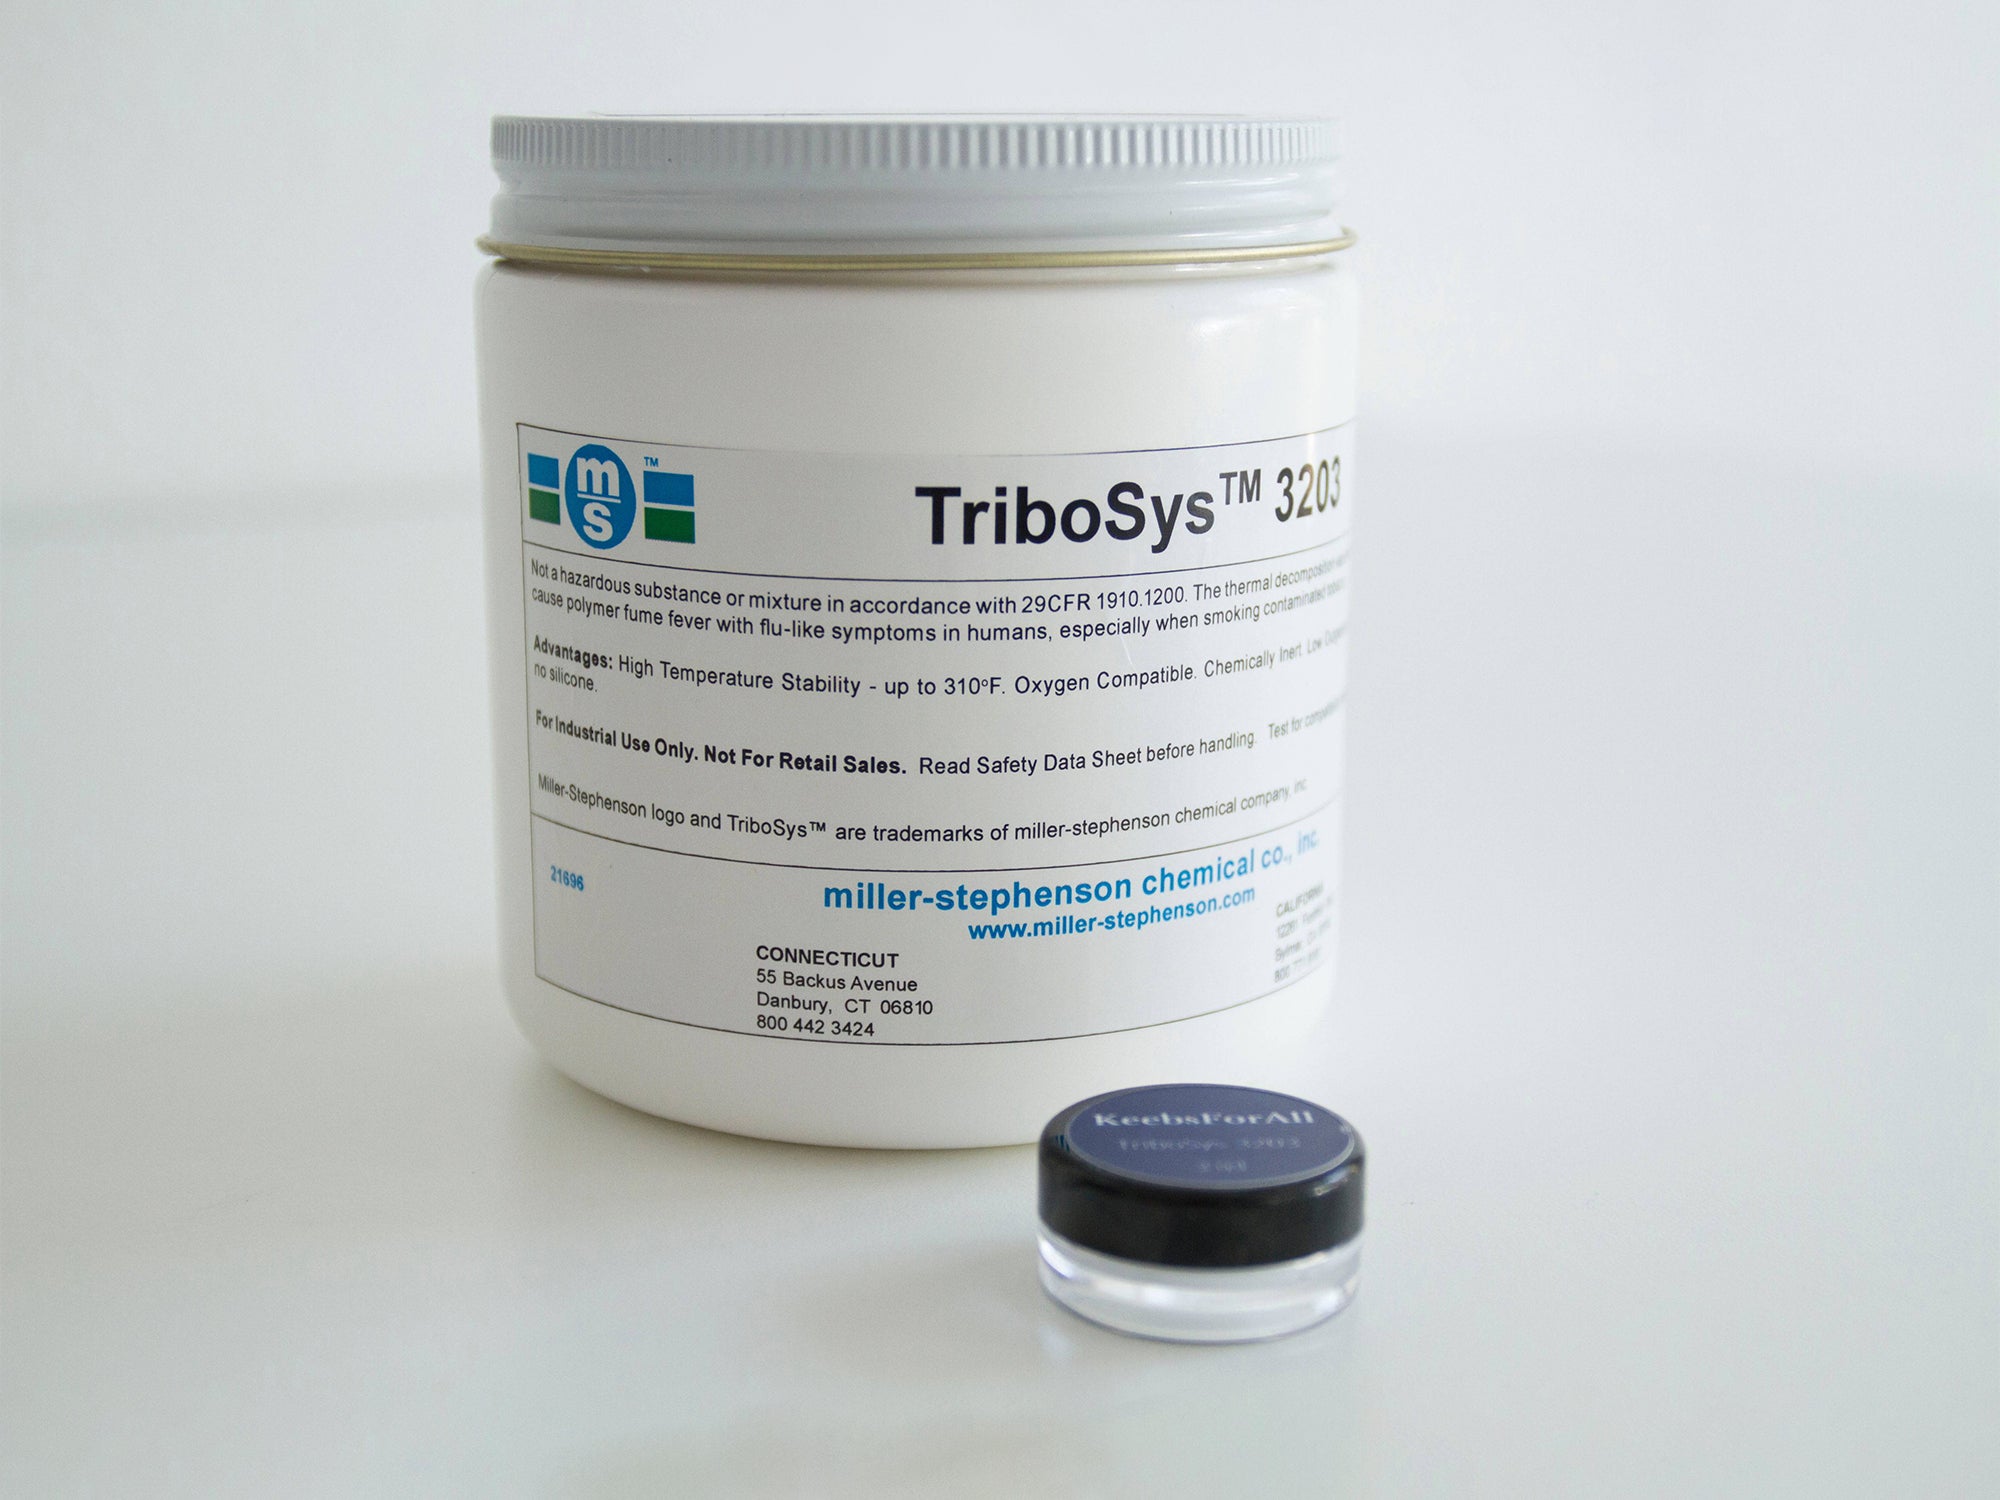 TriboSys 3203 Switch Lubricant - KeebsForAll